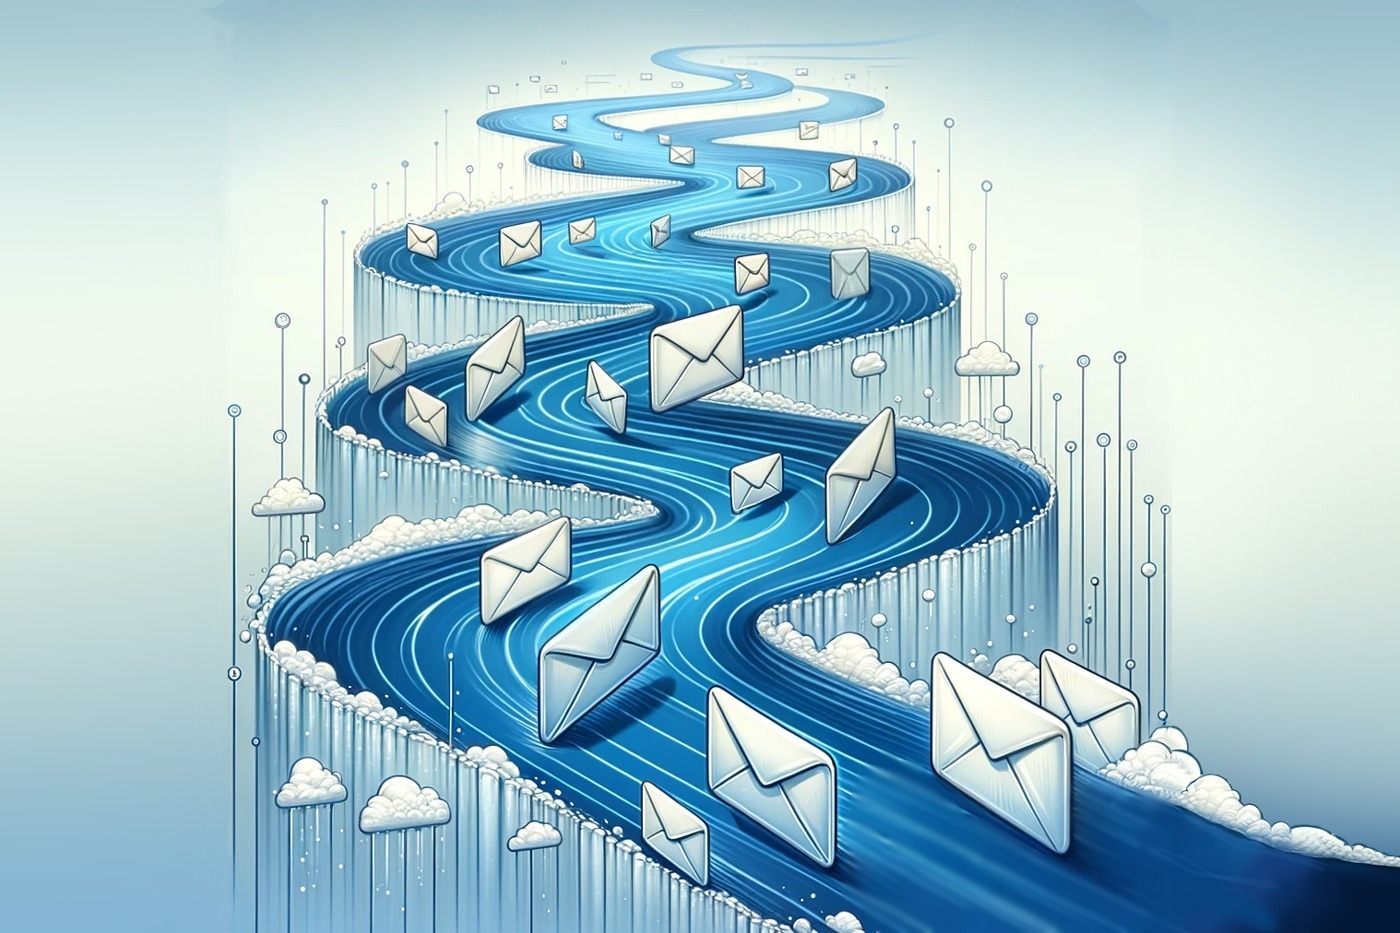 EmailStream conceptualized by a flowing stream of emails moving in what appears to be water